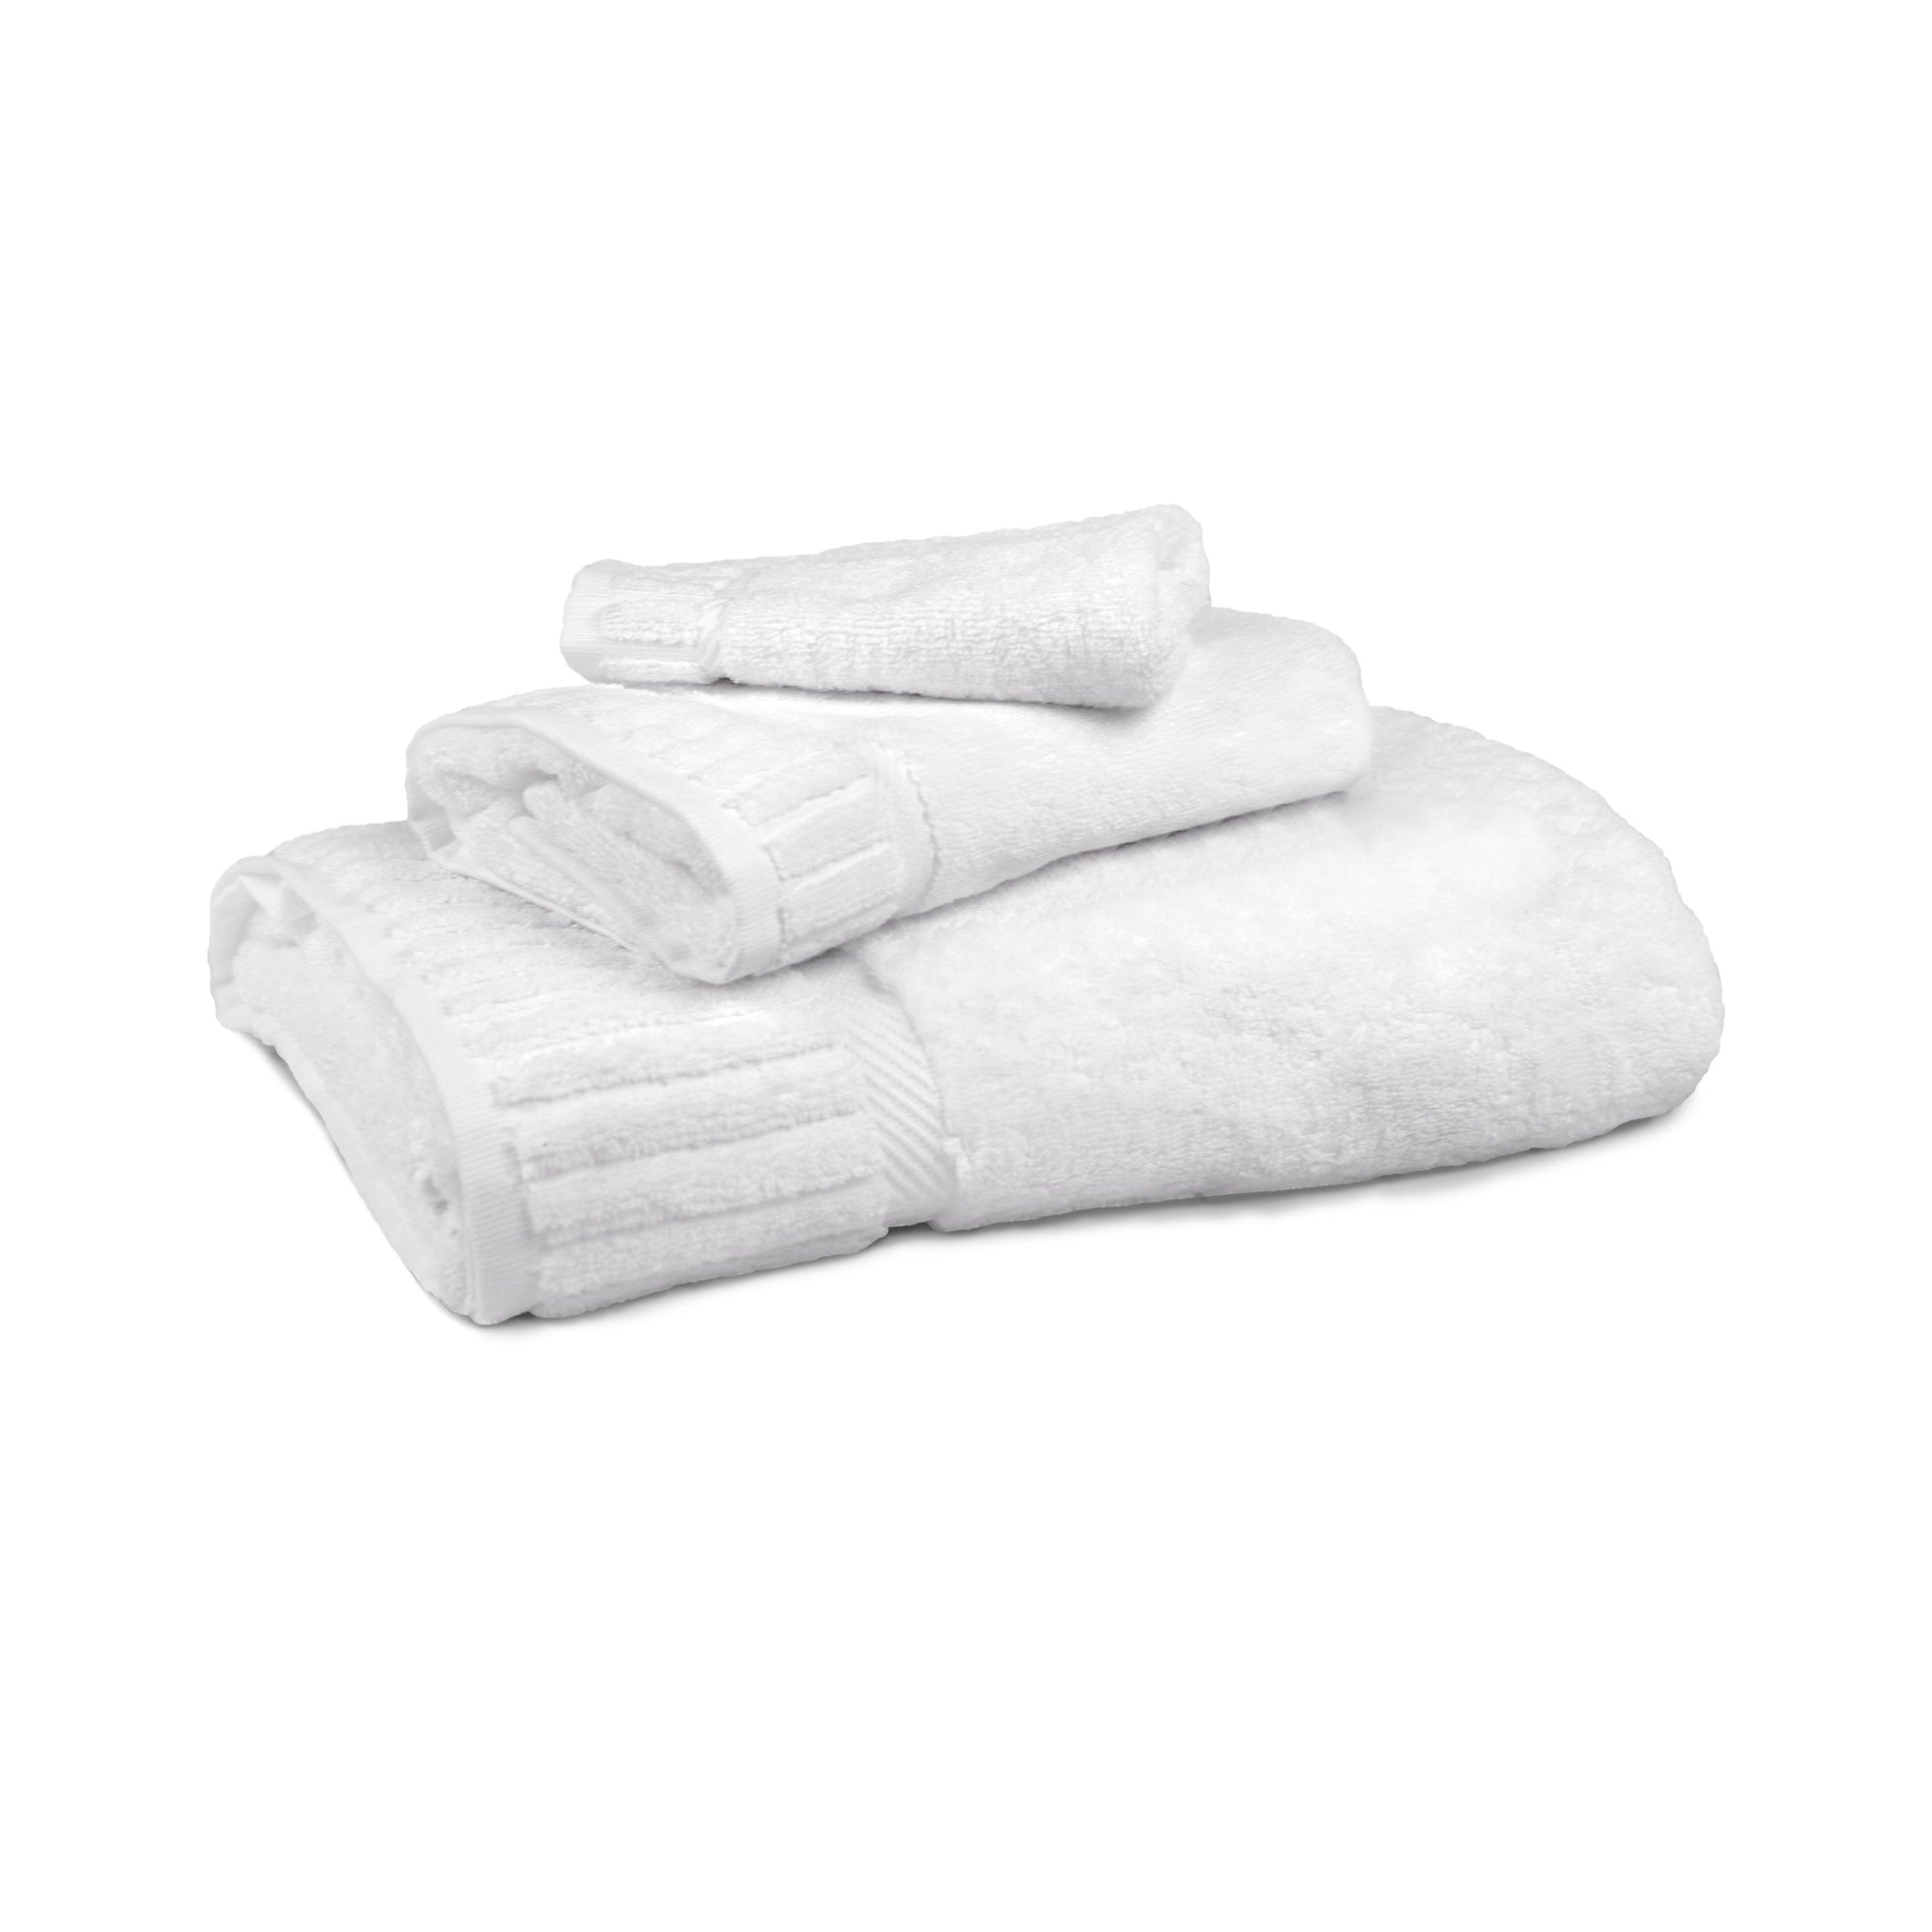 Solano Egyptian Cotton Towels - Luxor Linens 